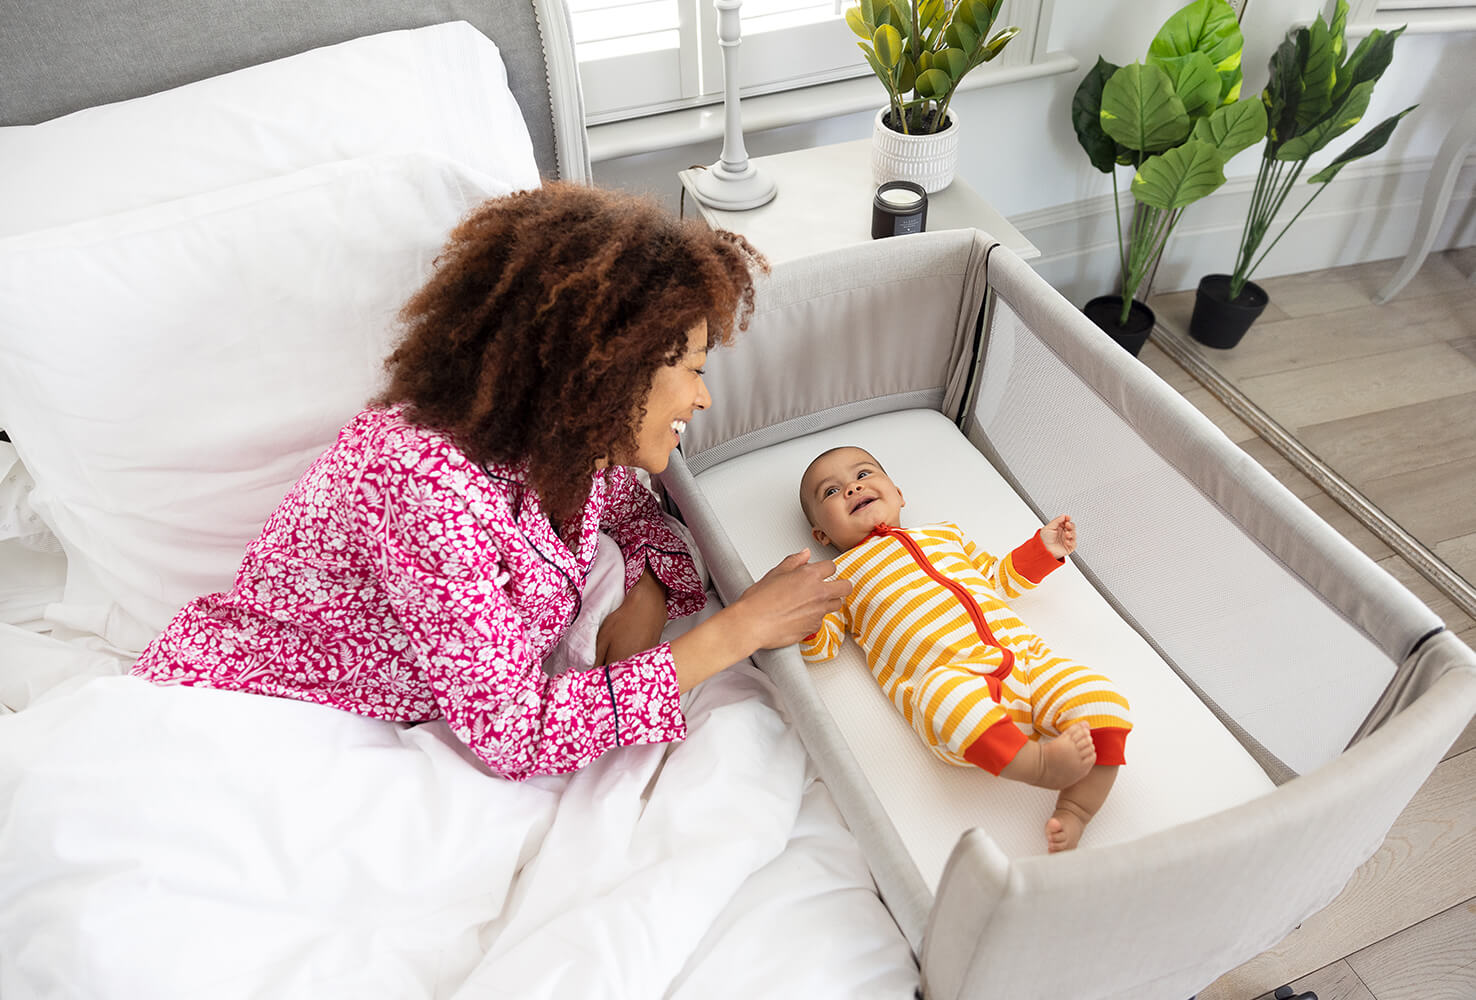 Mum lying in bed interacting with baby lying in the Roomie Go bedside travel crib

